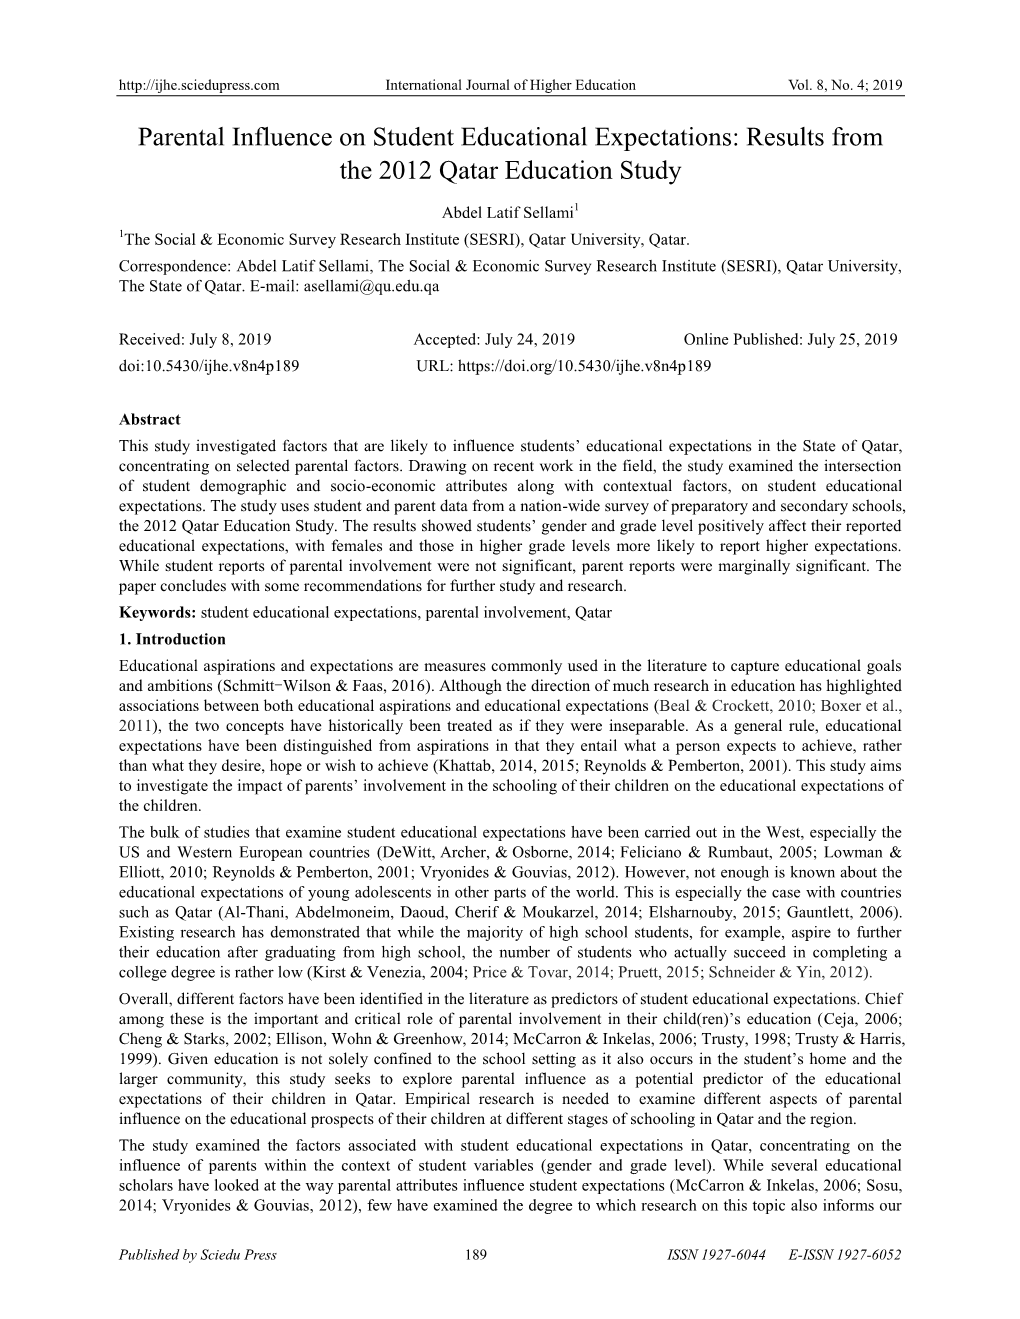 Parental Influence on Student Educational Expectations: Results from the 2012 Qatar Education Study